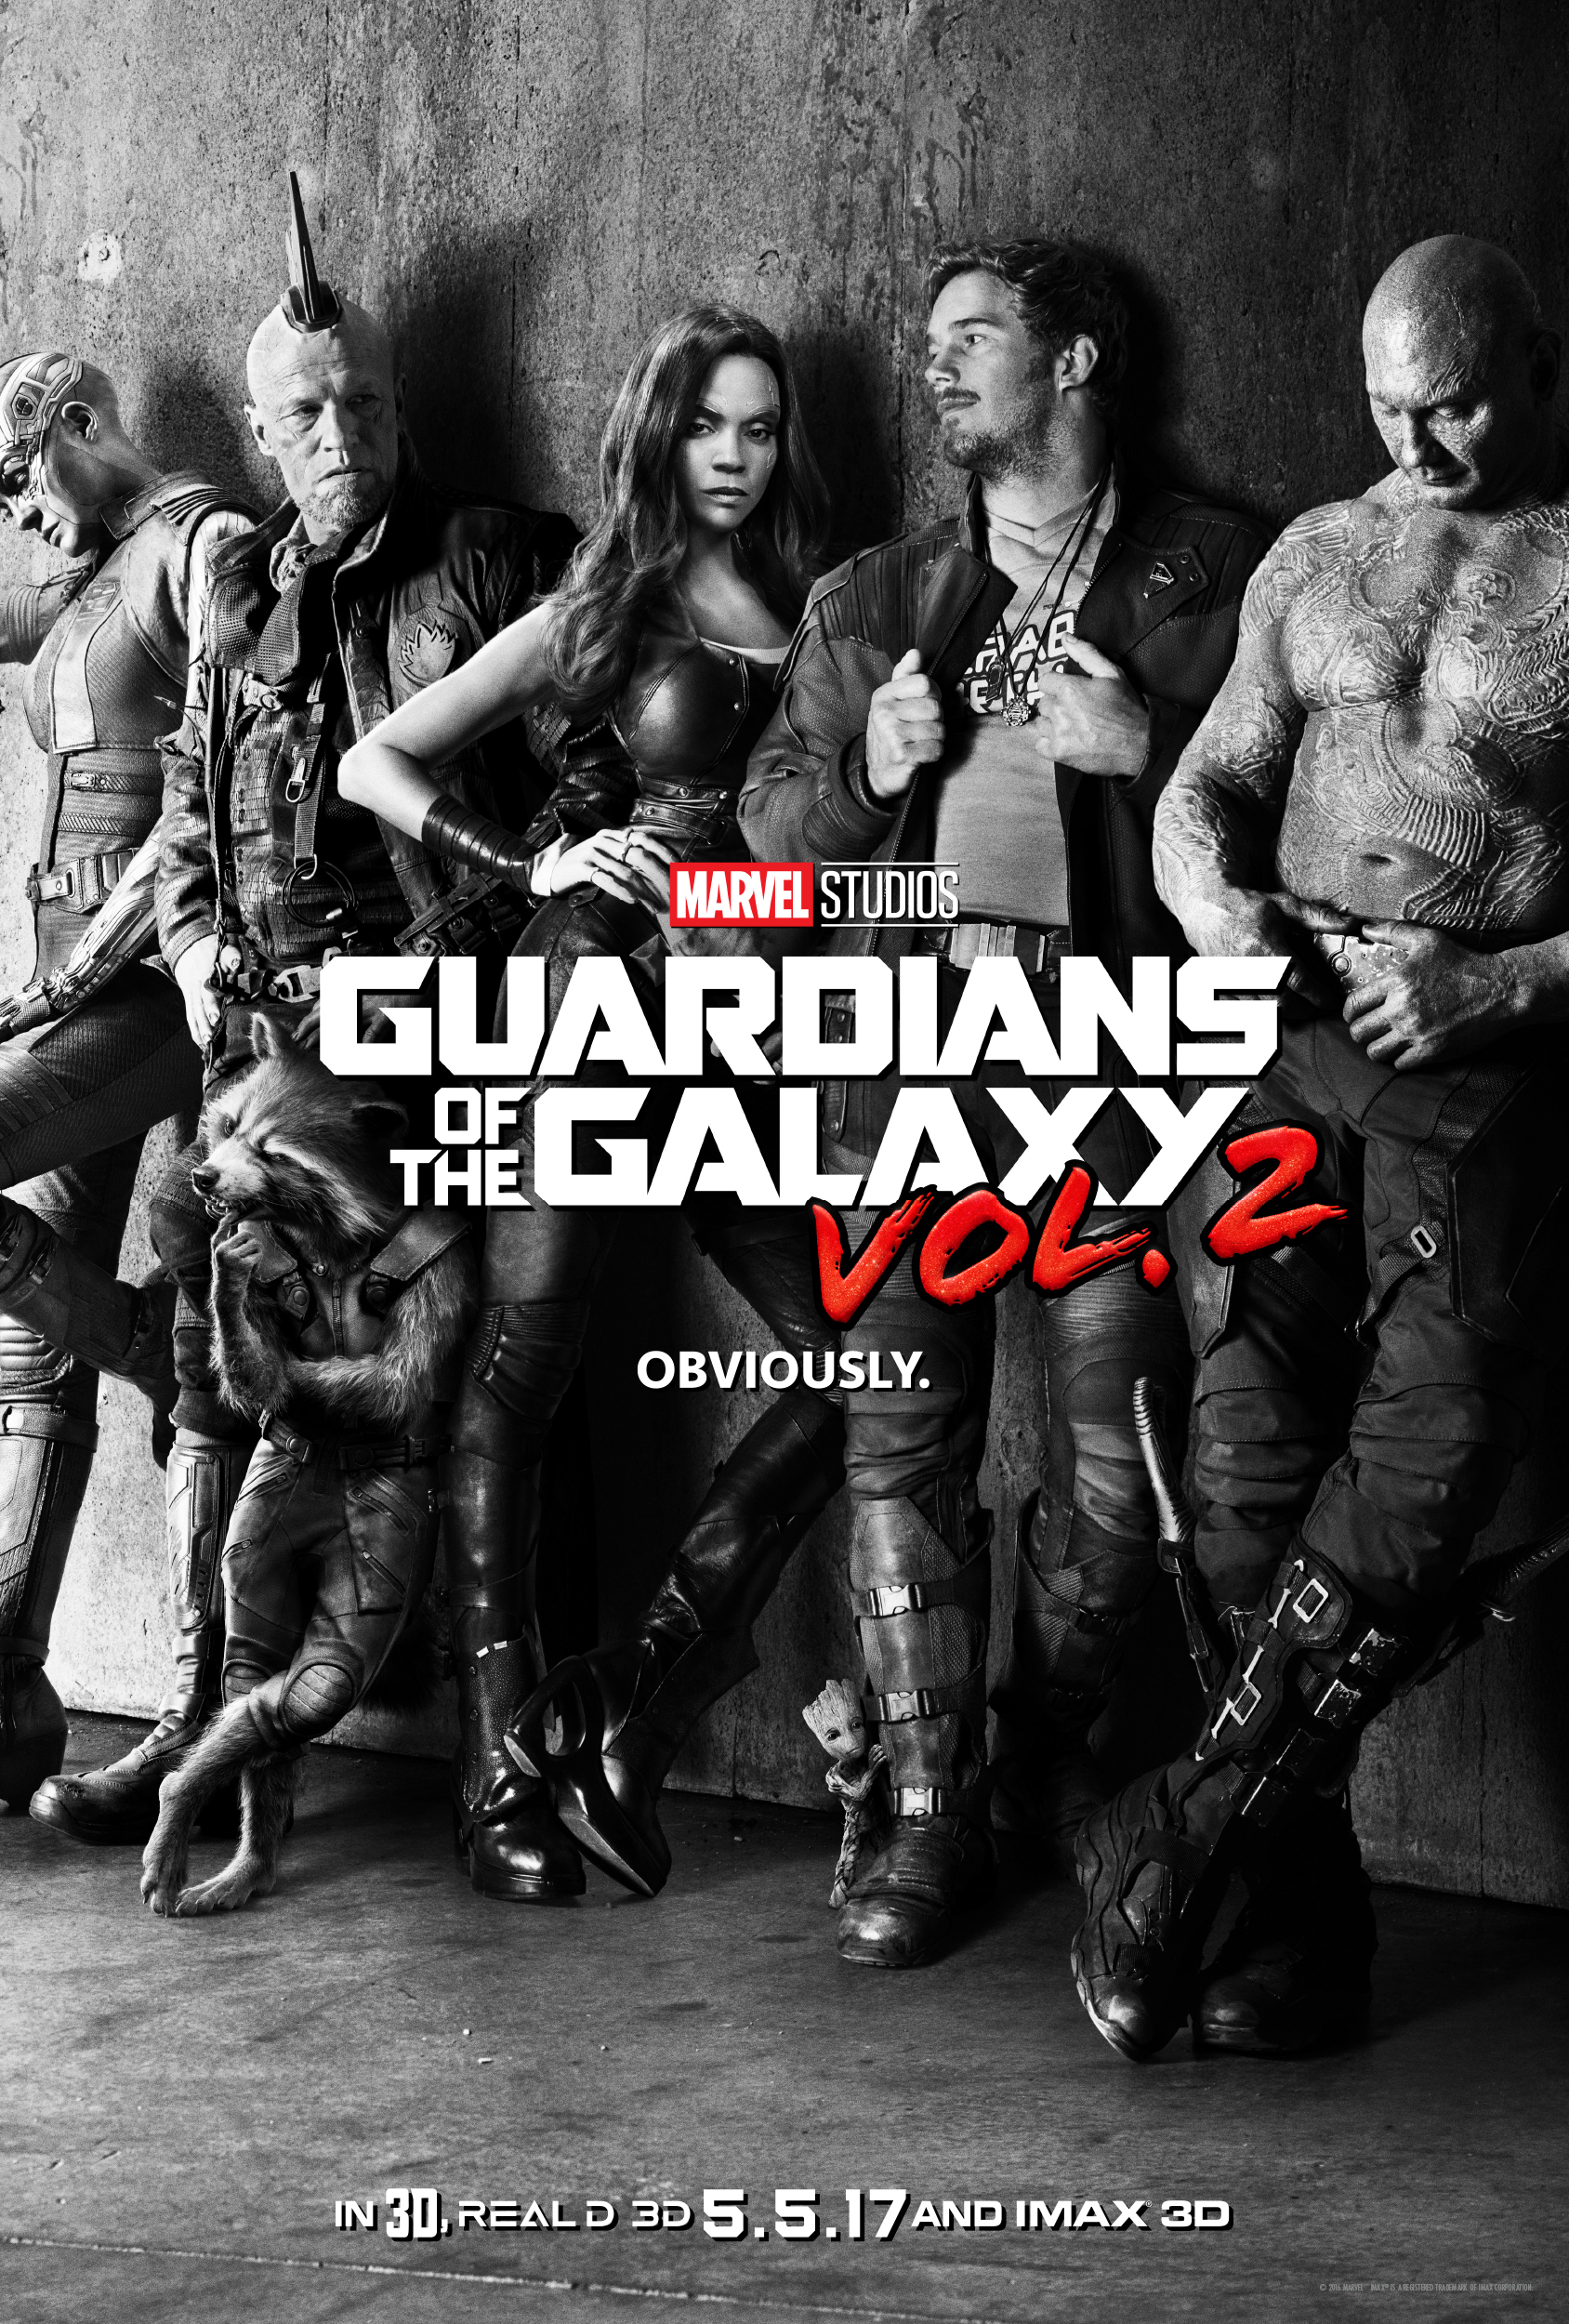 Marvel Studios Guardians of the Galaxy Volume 2 - In theaters May 5th